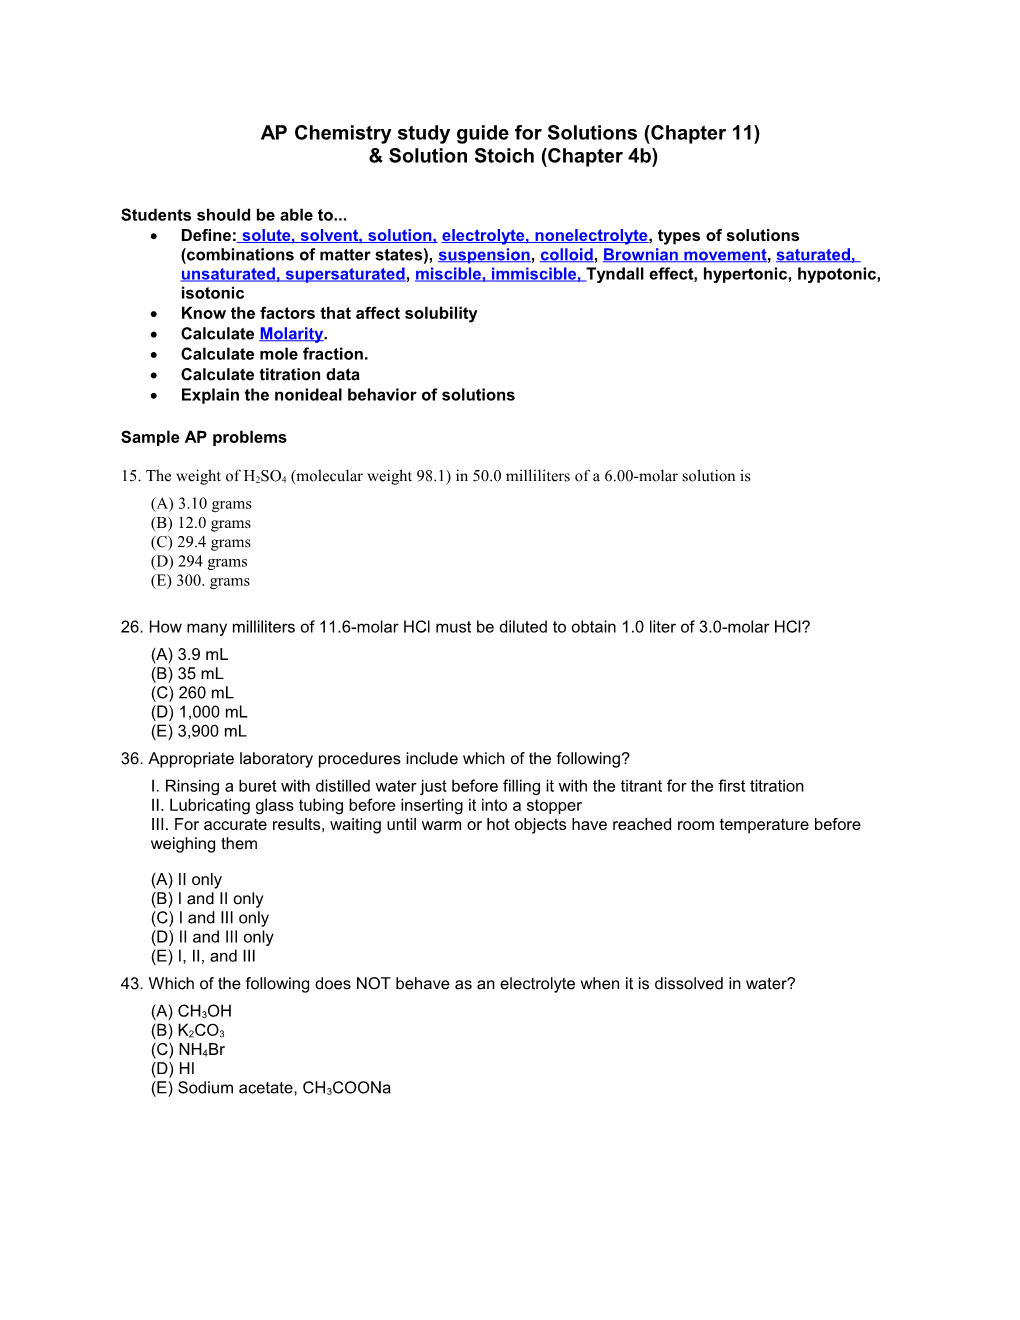 AP Chemistry Study Guide for Solutions (Chapter 11)